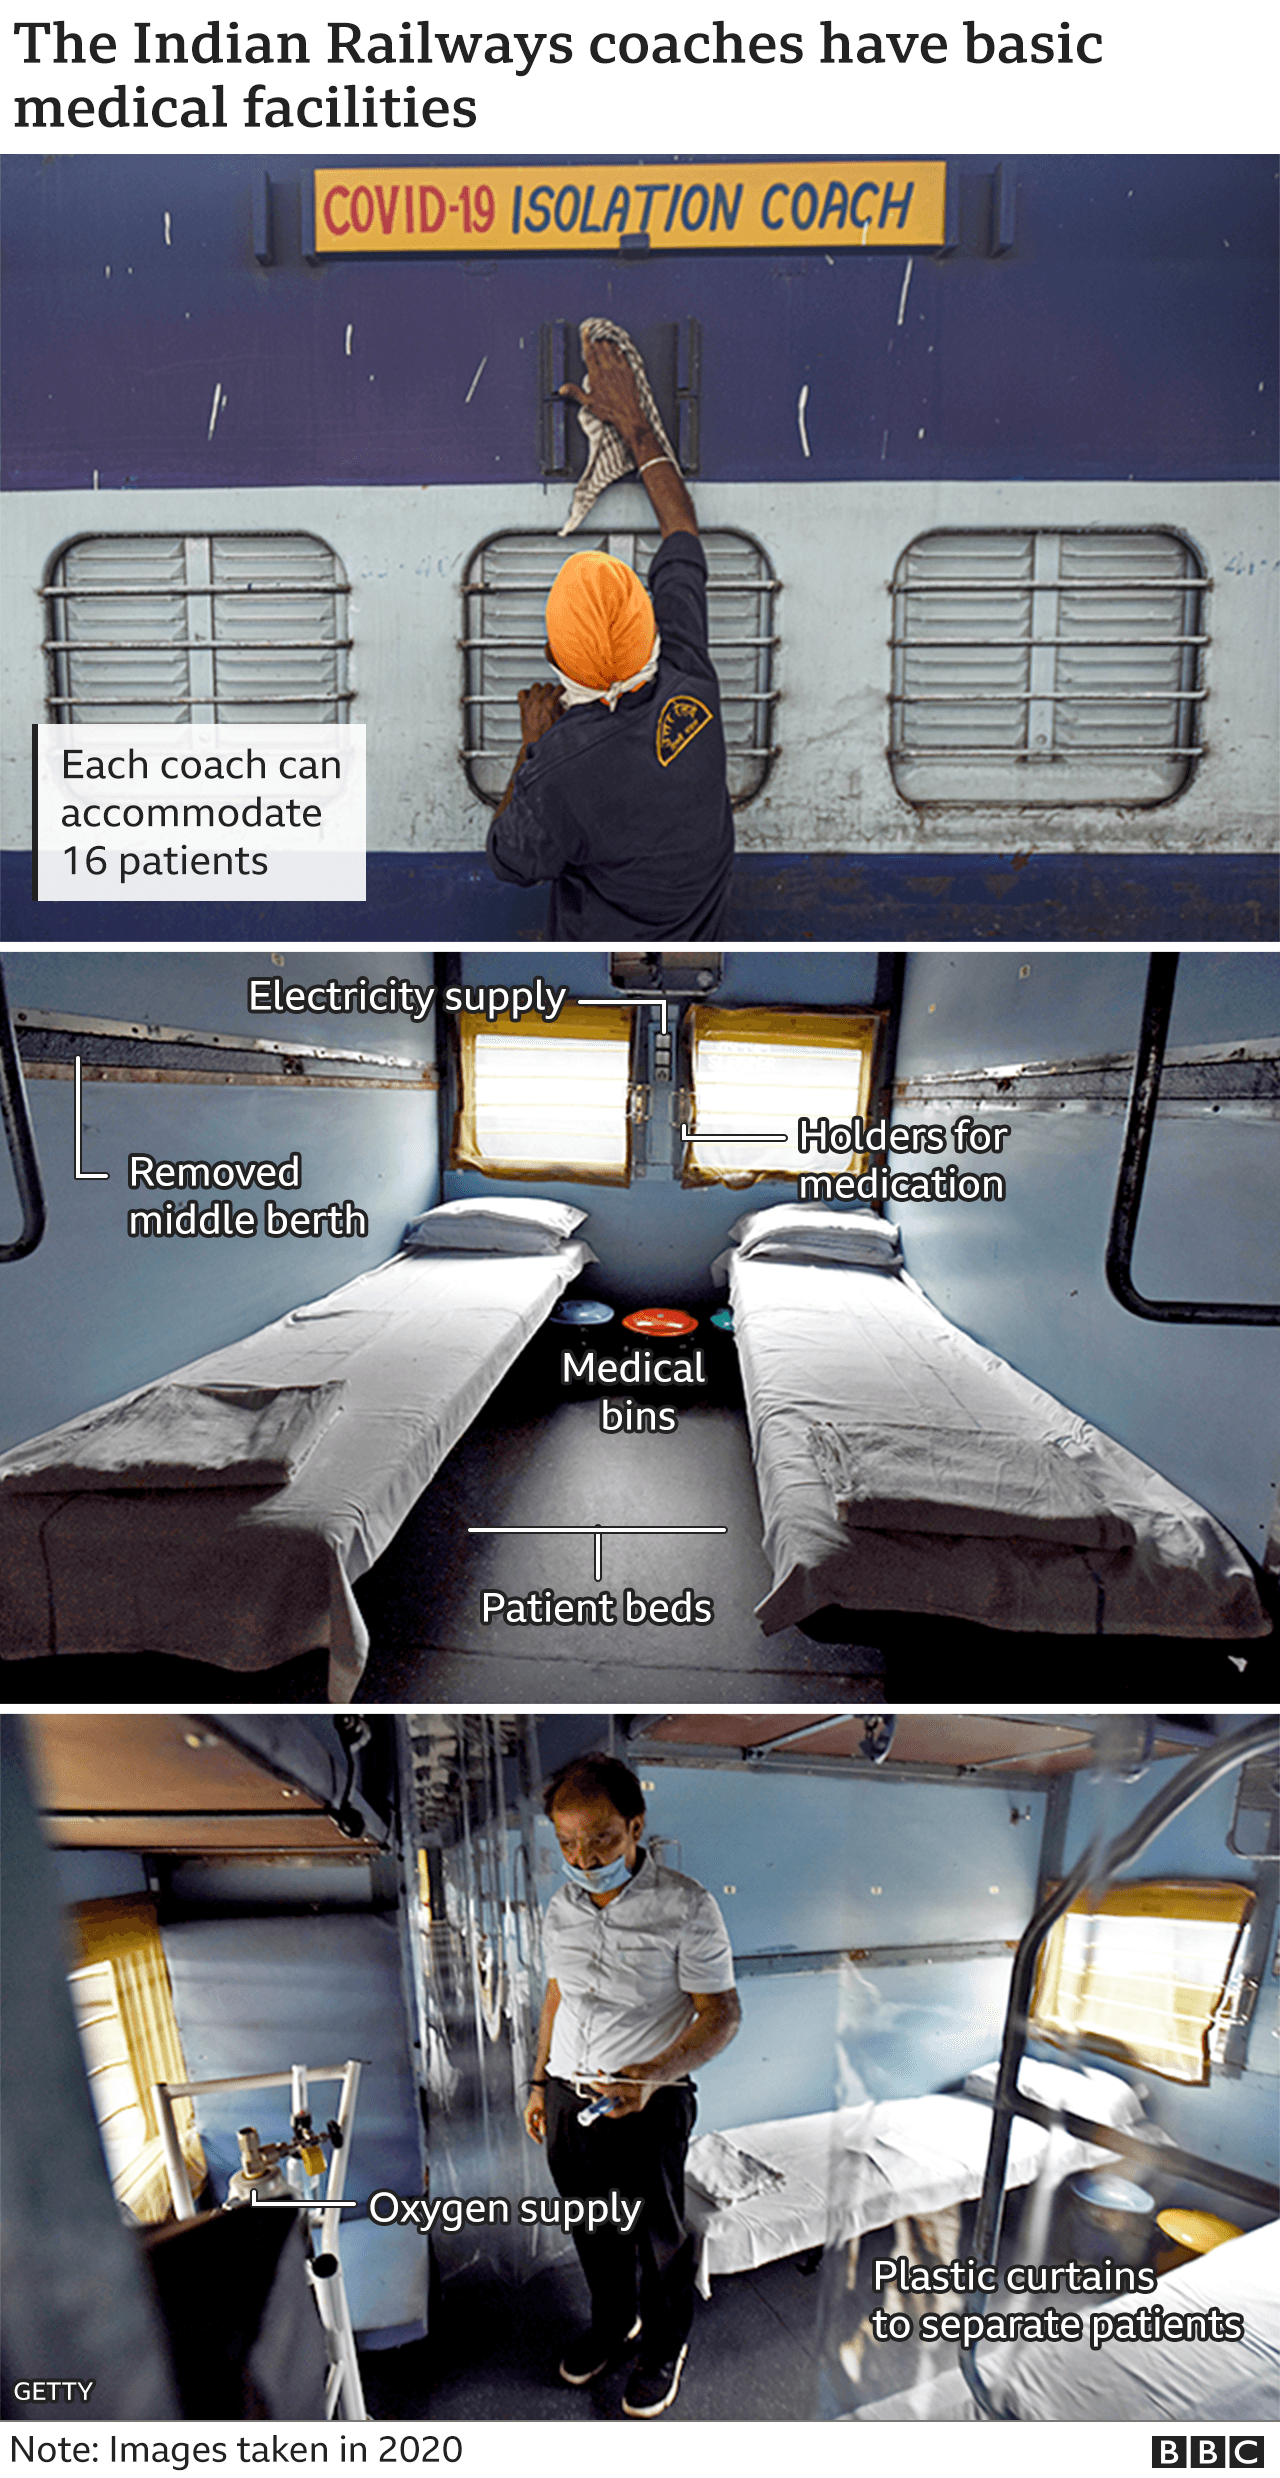 Annotated images of India's converted train carriages - being used as Covid isolation wards